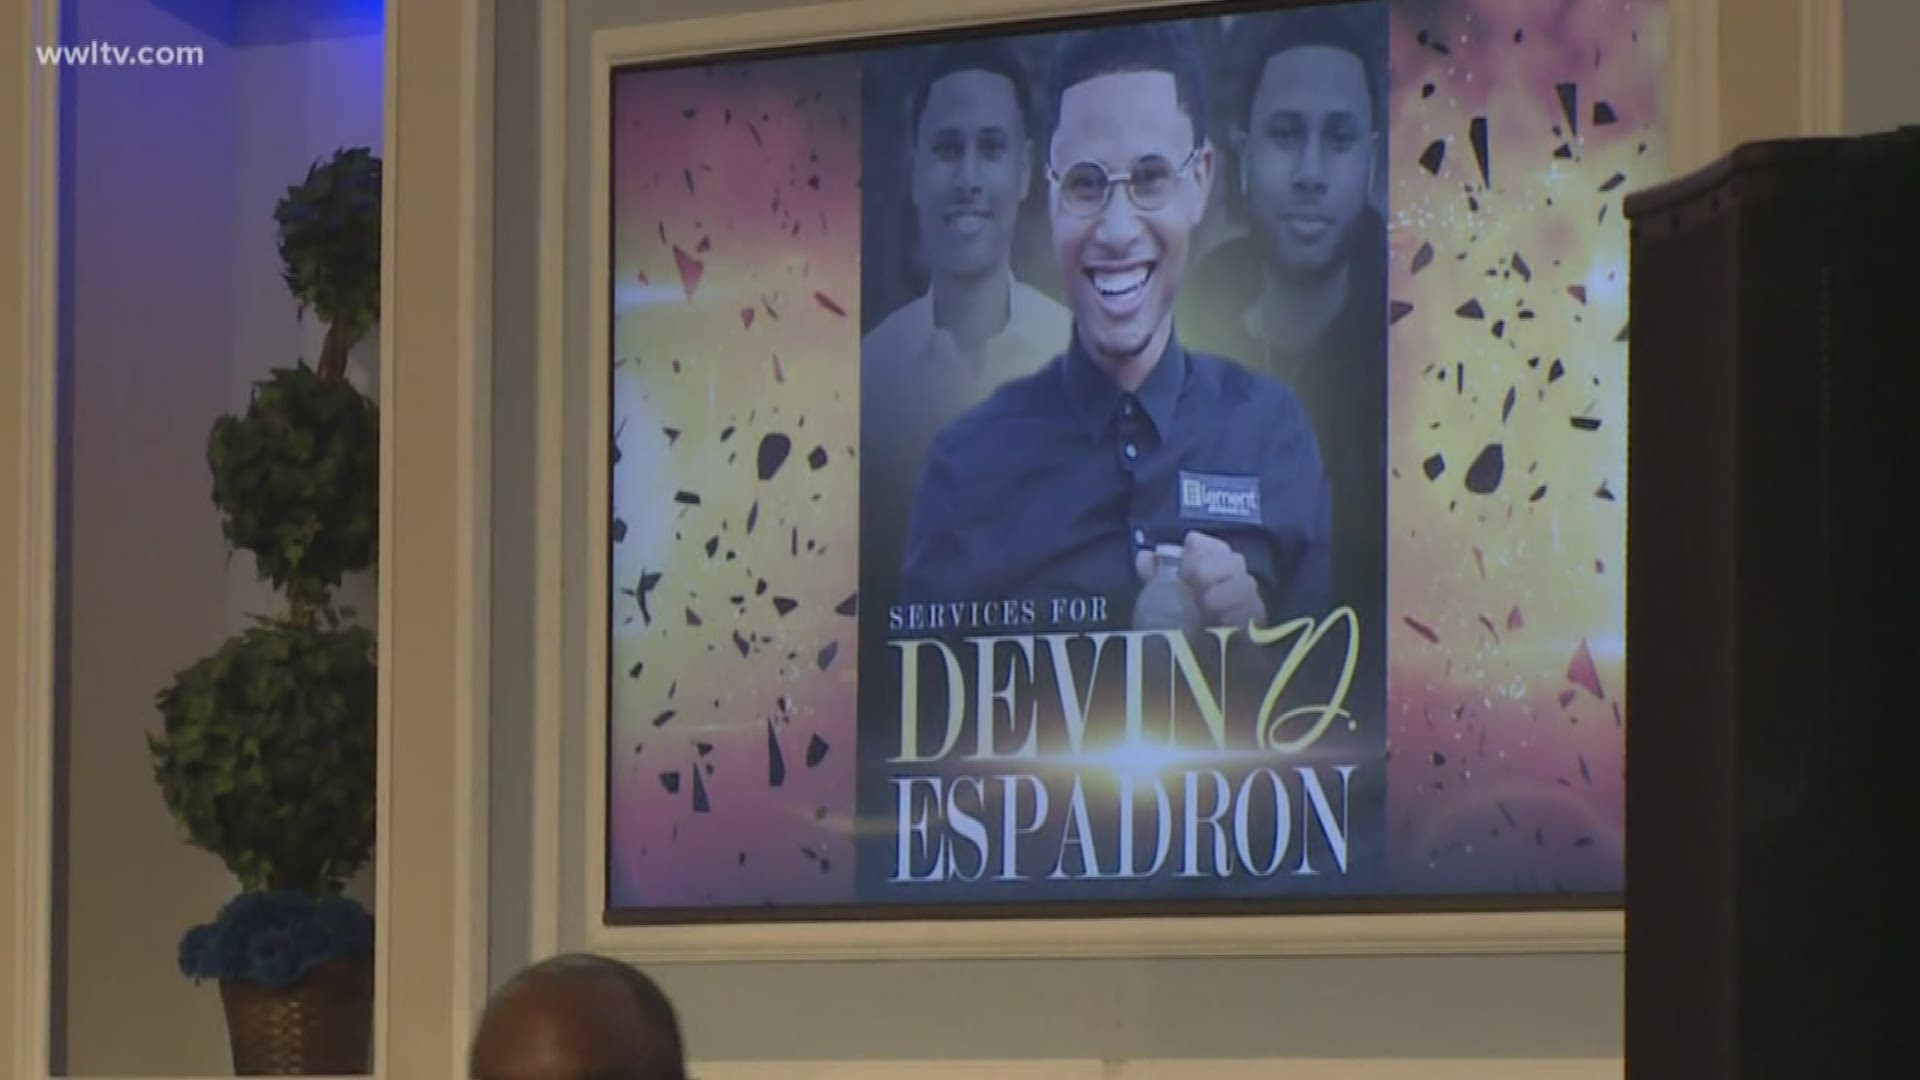 Family and friends of Devin Espadron fill New Home Ministries to pay respects and celebrate the life of the 22-year-old entrepreneur.